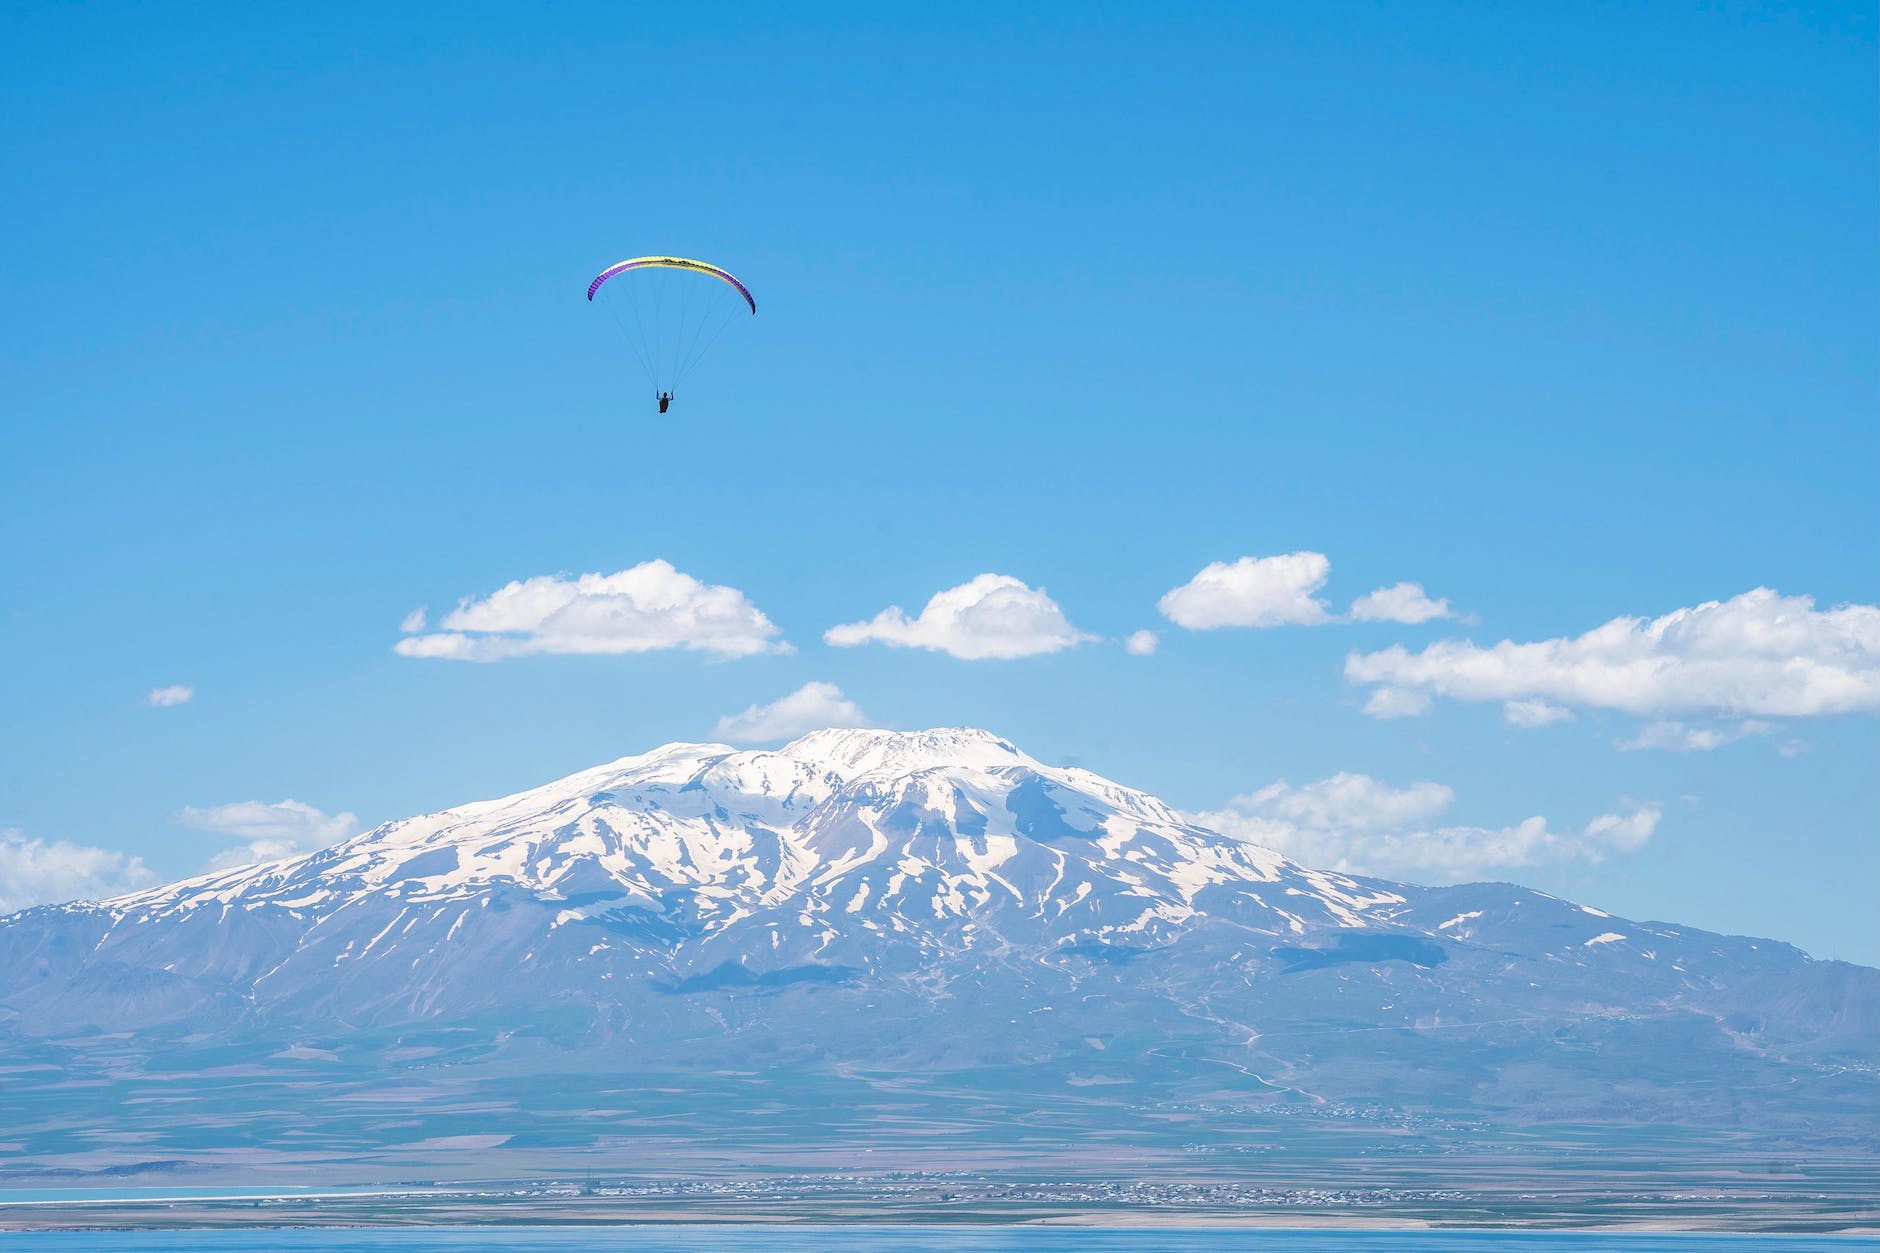 person paragliding over the sea near snow covered mountain